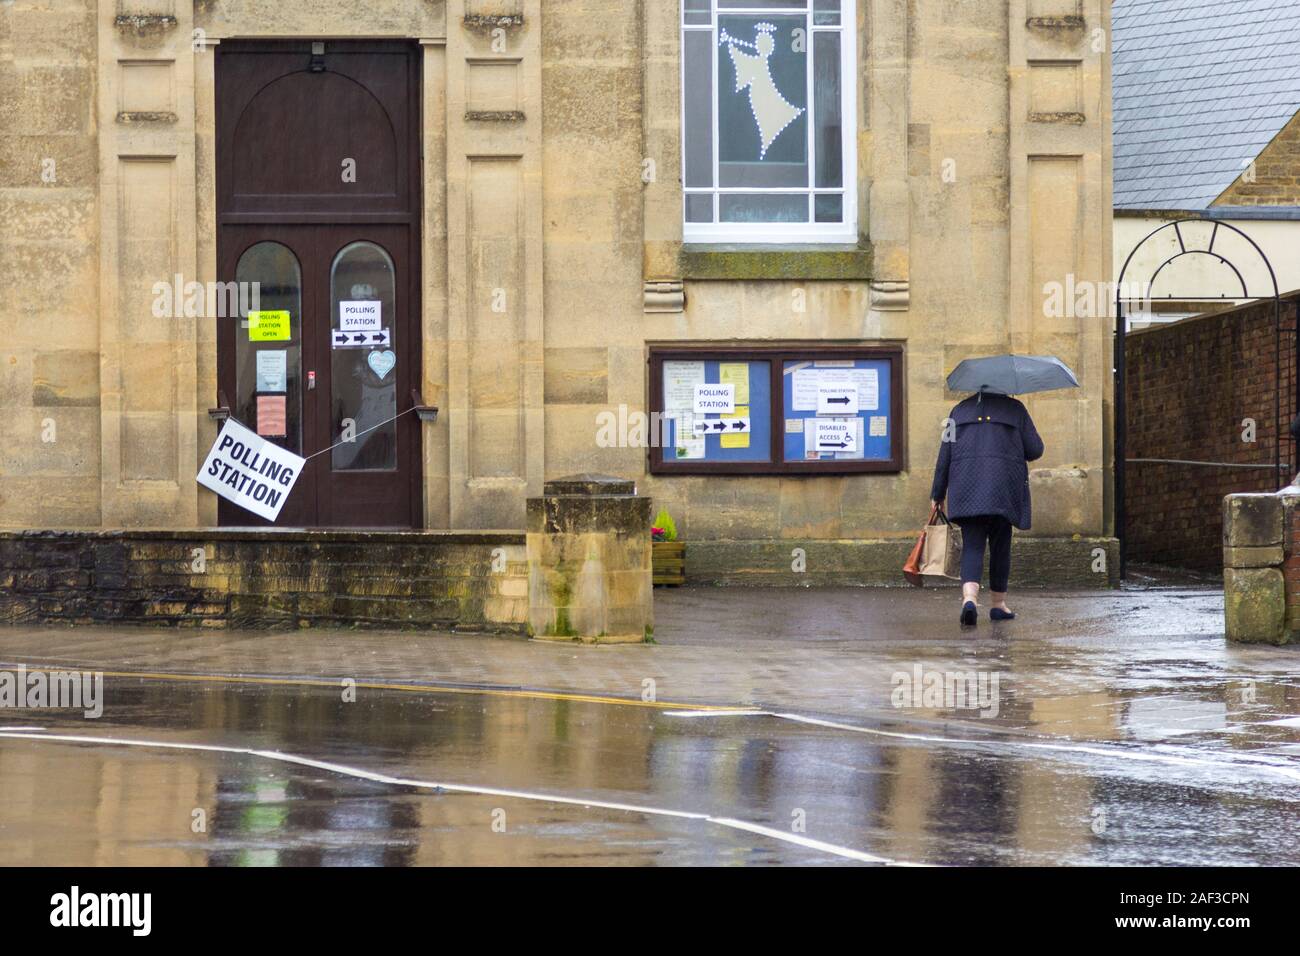 Stroud, UK. 12 Dec, 2019. Wet weather makes for a quiet afternoon at the largest polling station in the Stroud constituency, Dursley Methodist Church with an electorate of over 2200 voters. Credit: Carl Hewlett/Alamy Live News. Stock Photo